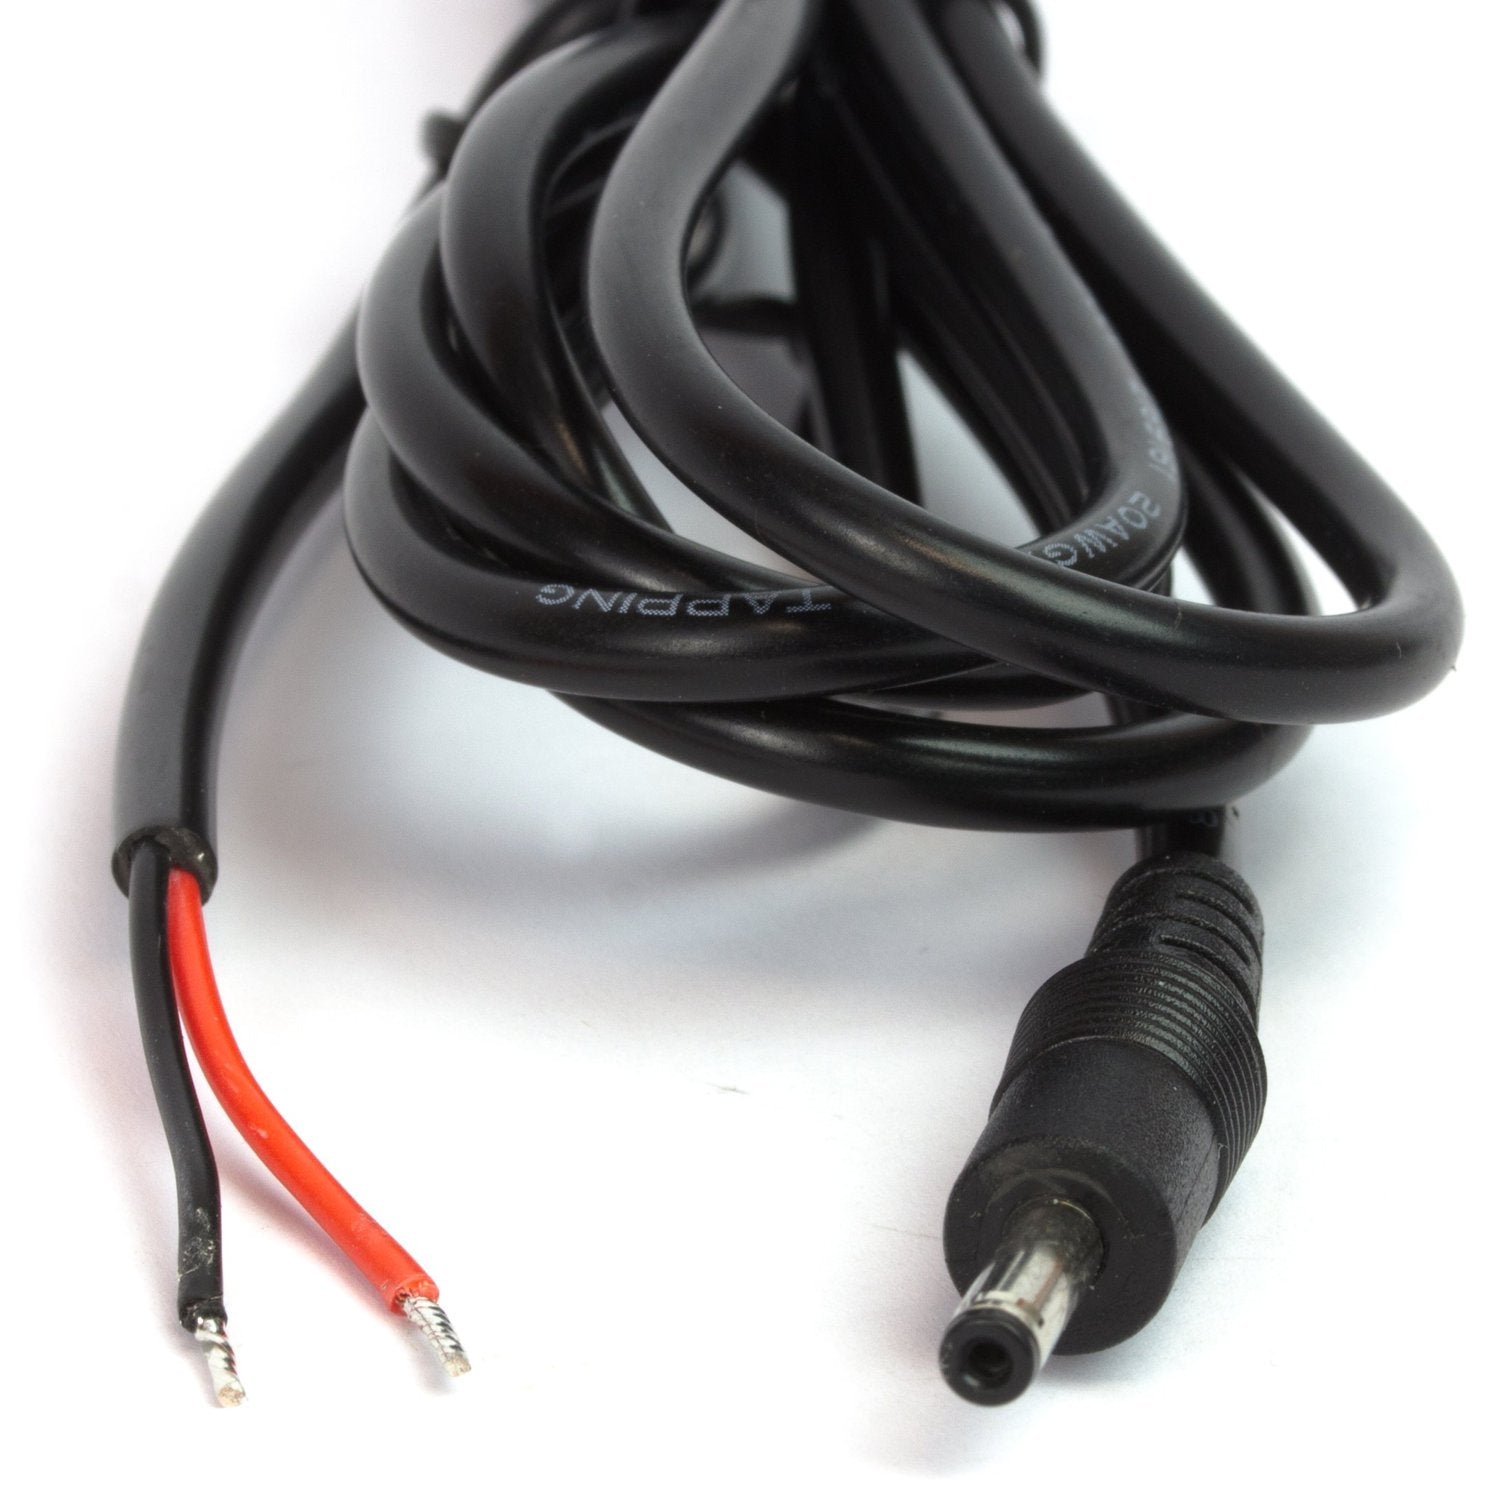 Wide Input SHIM - 1.5m long power cable